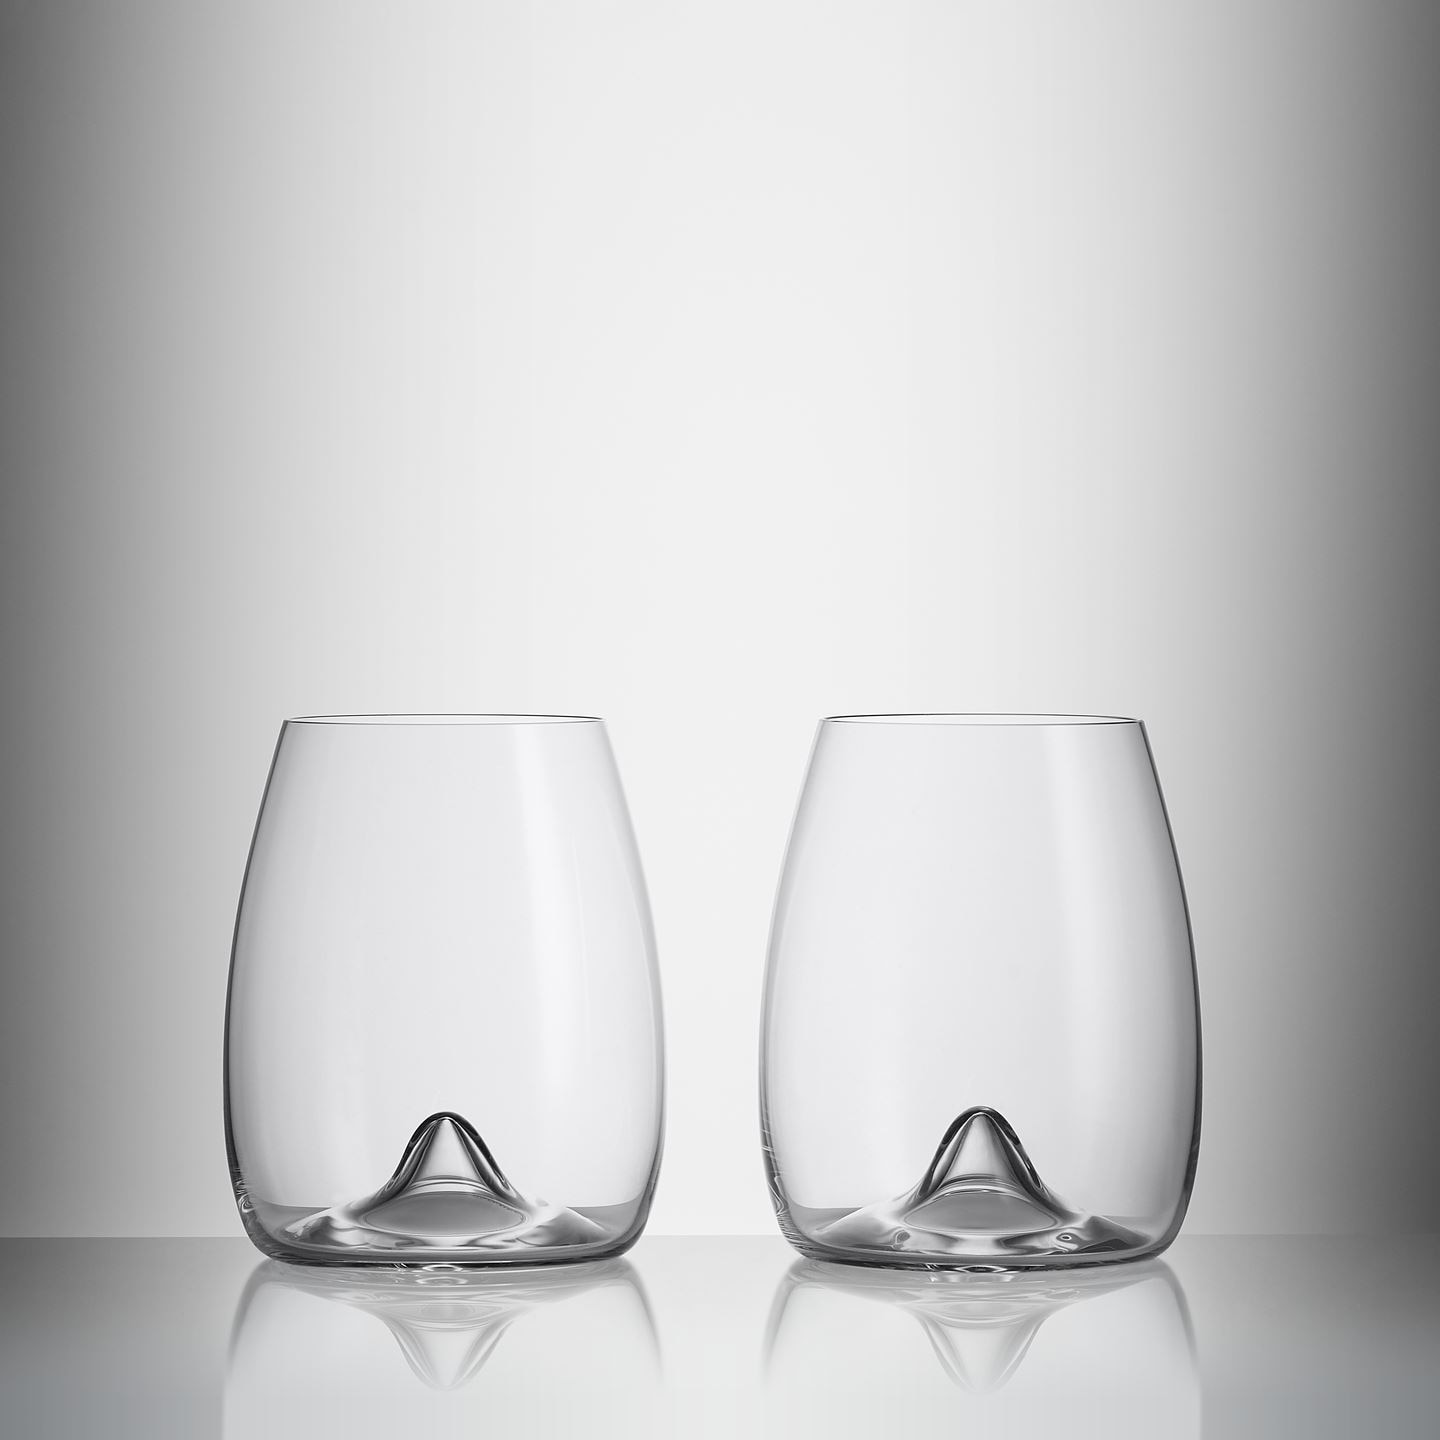 Elegant Modern Crystal Stylish Durable Wine Glass Set for Party